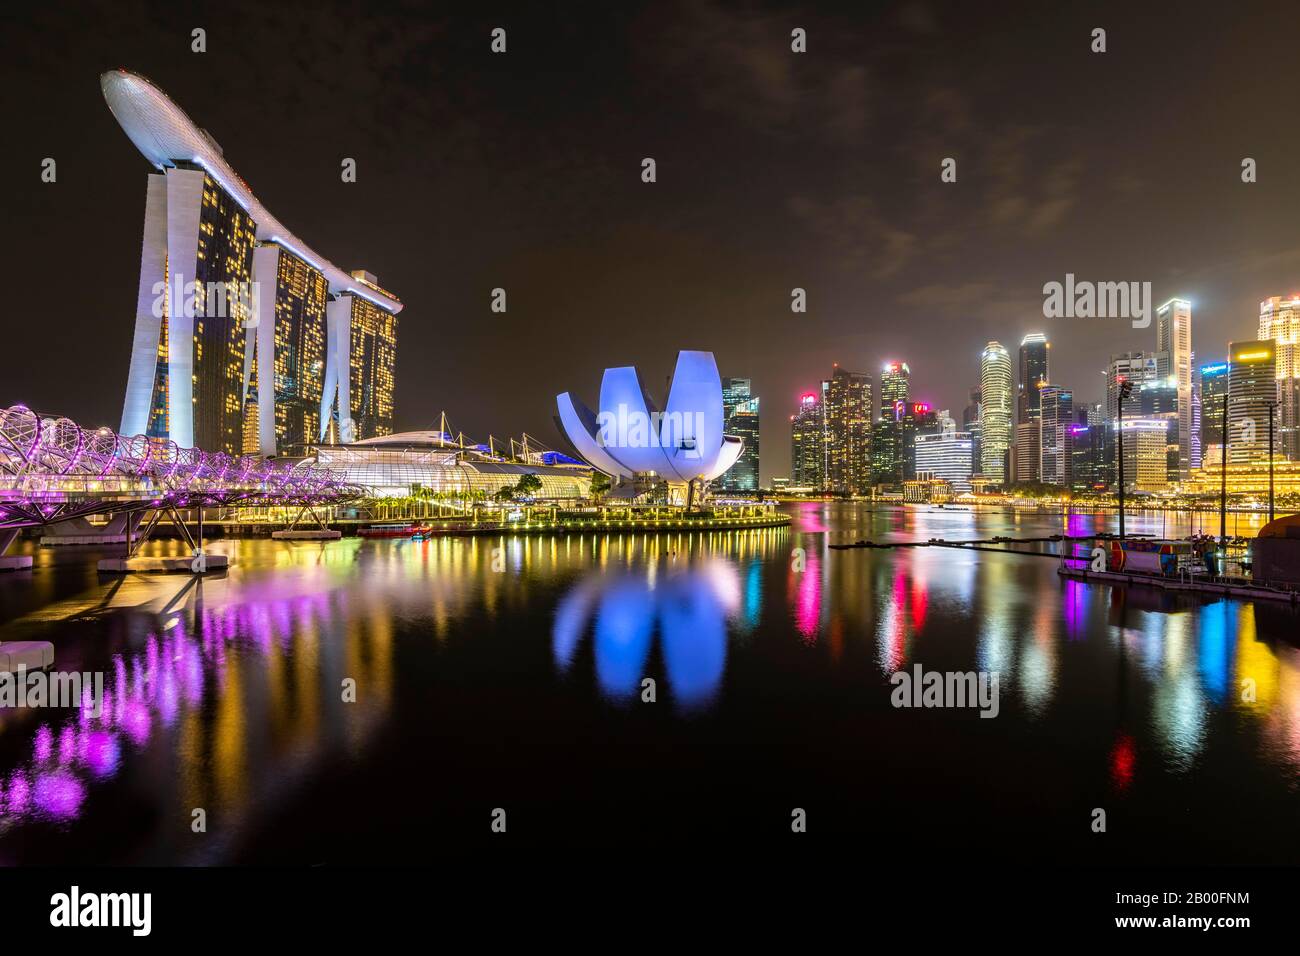 Marina Bay Sands Hotel, ArtScience Museum and skyline at night, Financial District, Banking District, Marina Bay, Downtown Core, Singapore Stock Photo